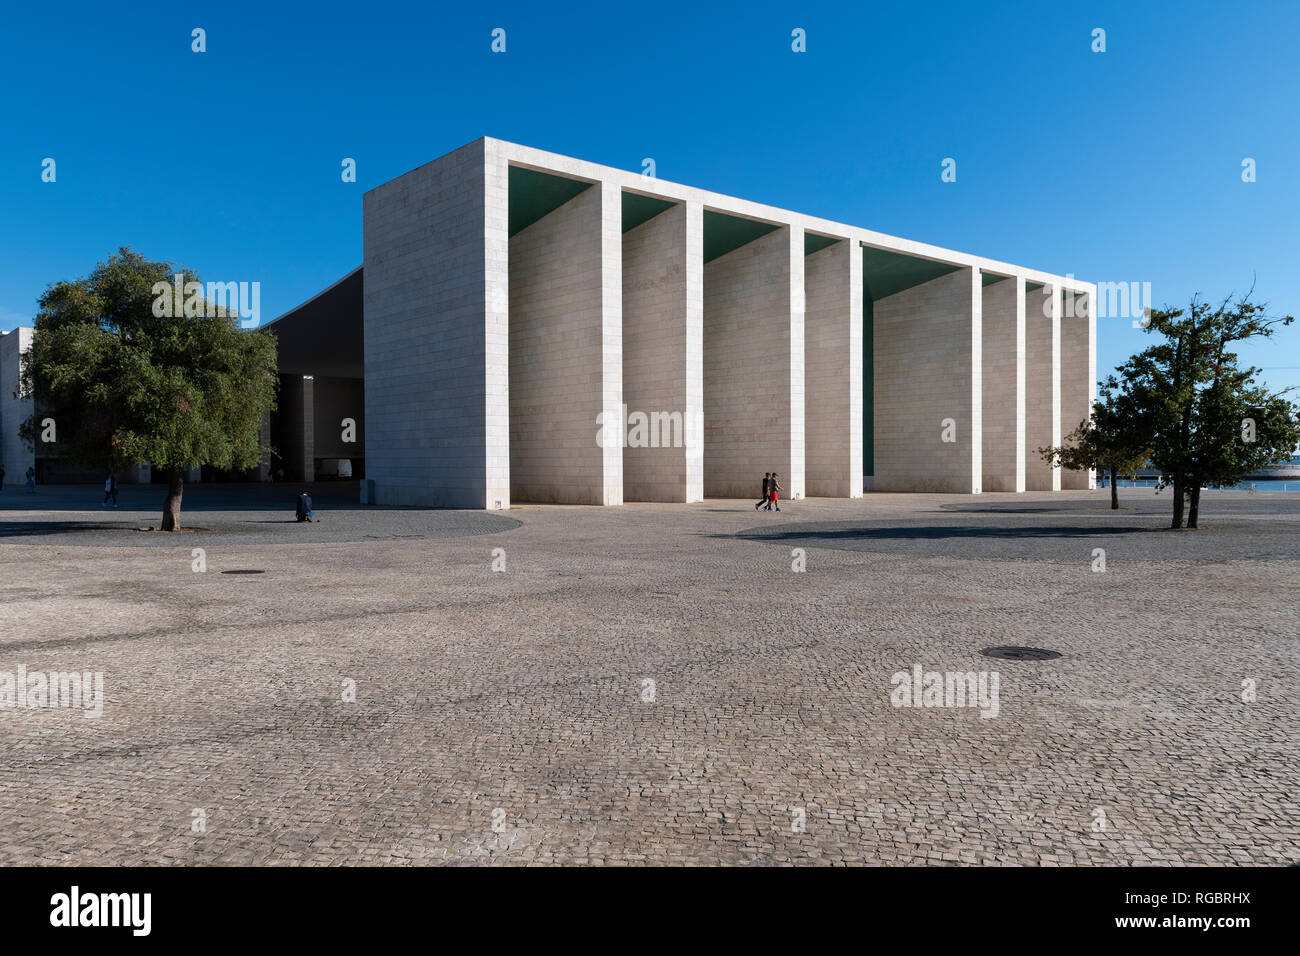 Lisbon, Portugal - October 20, 2018: View of the Portugal Pavillion (Pavilhao de Portugal) at the Parque das Nacoes in the city of Lisbon, in Portugal Stock Photo